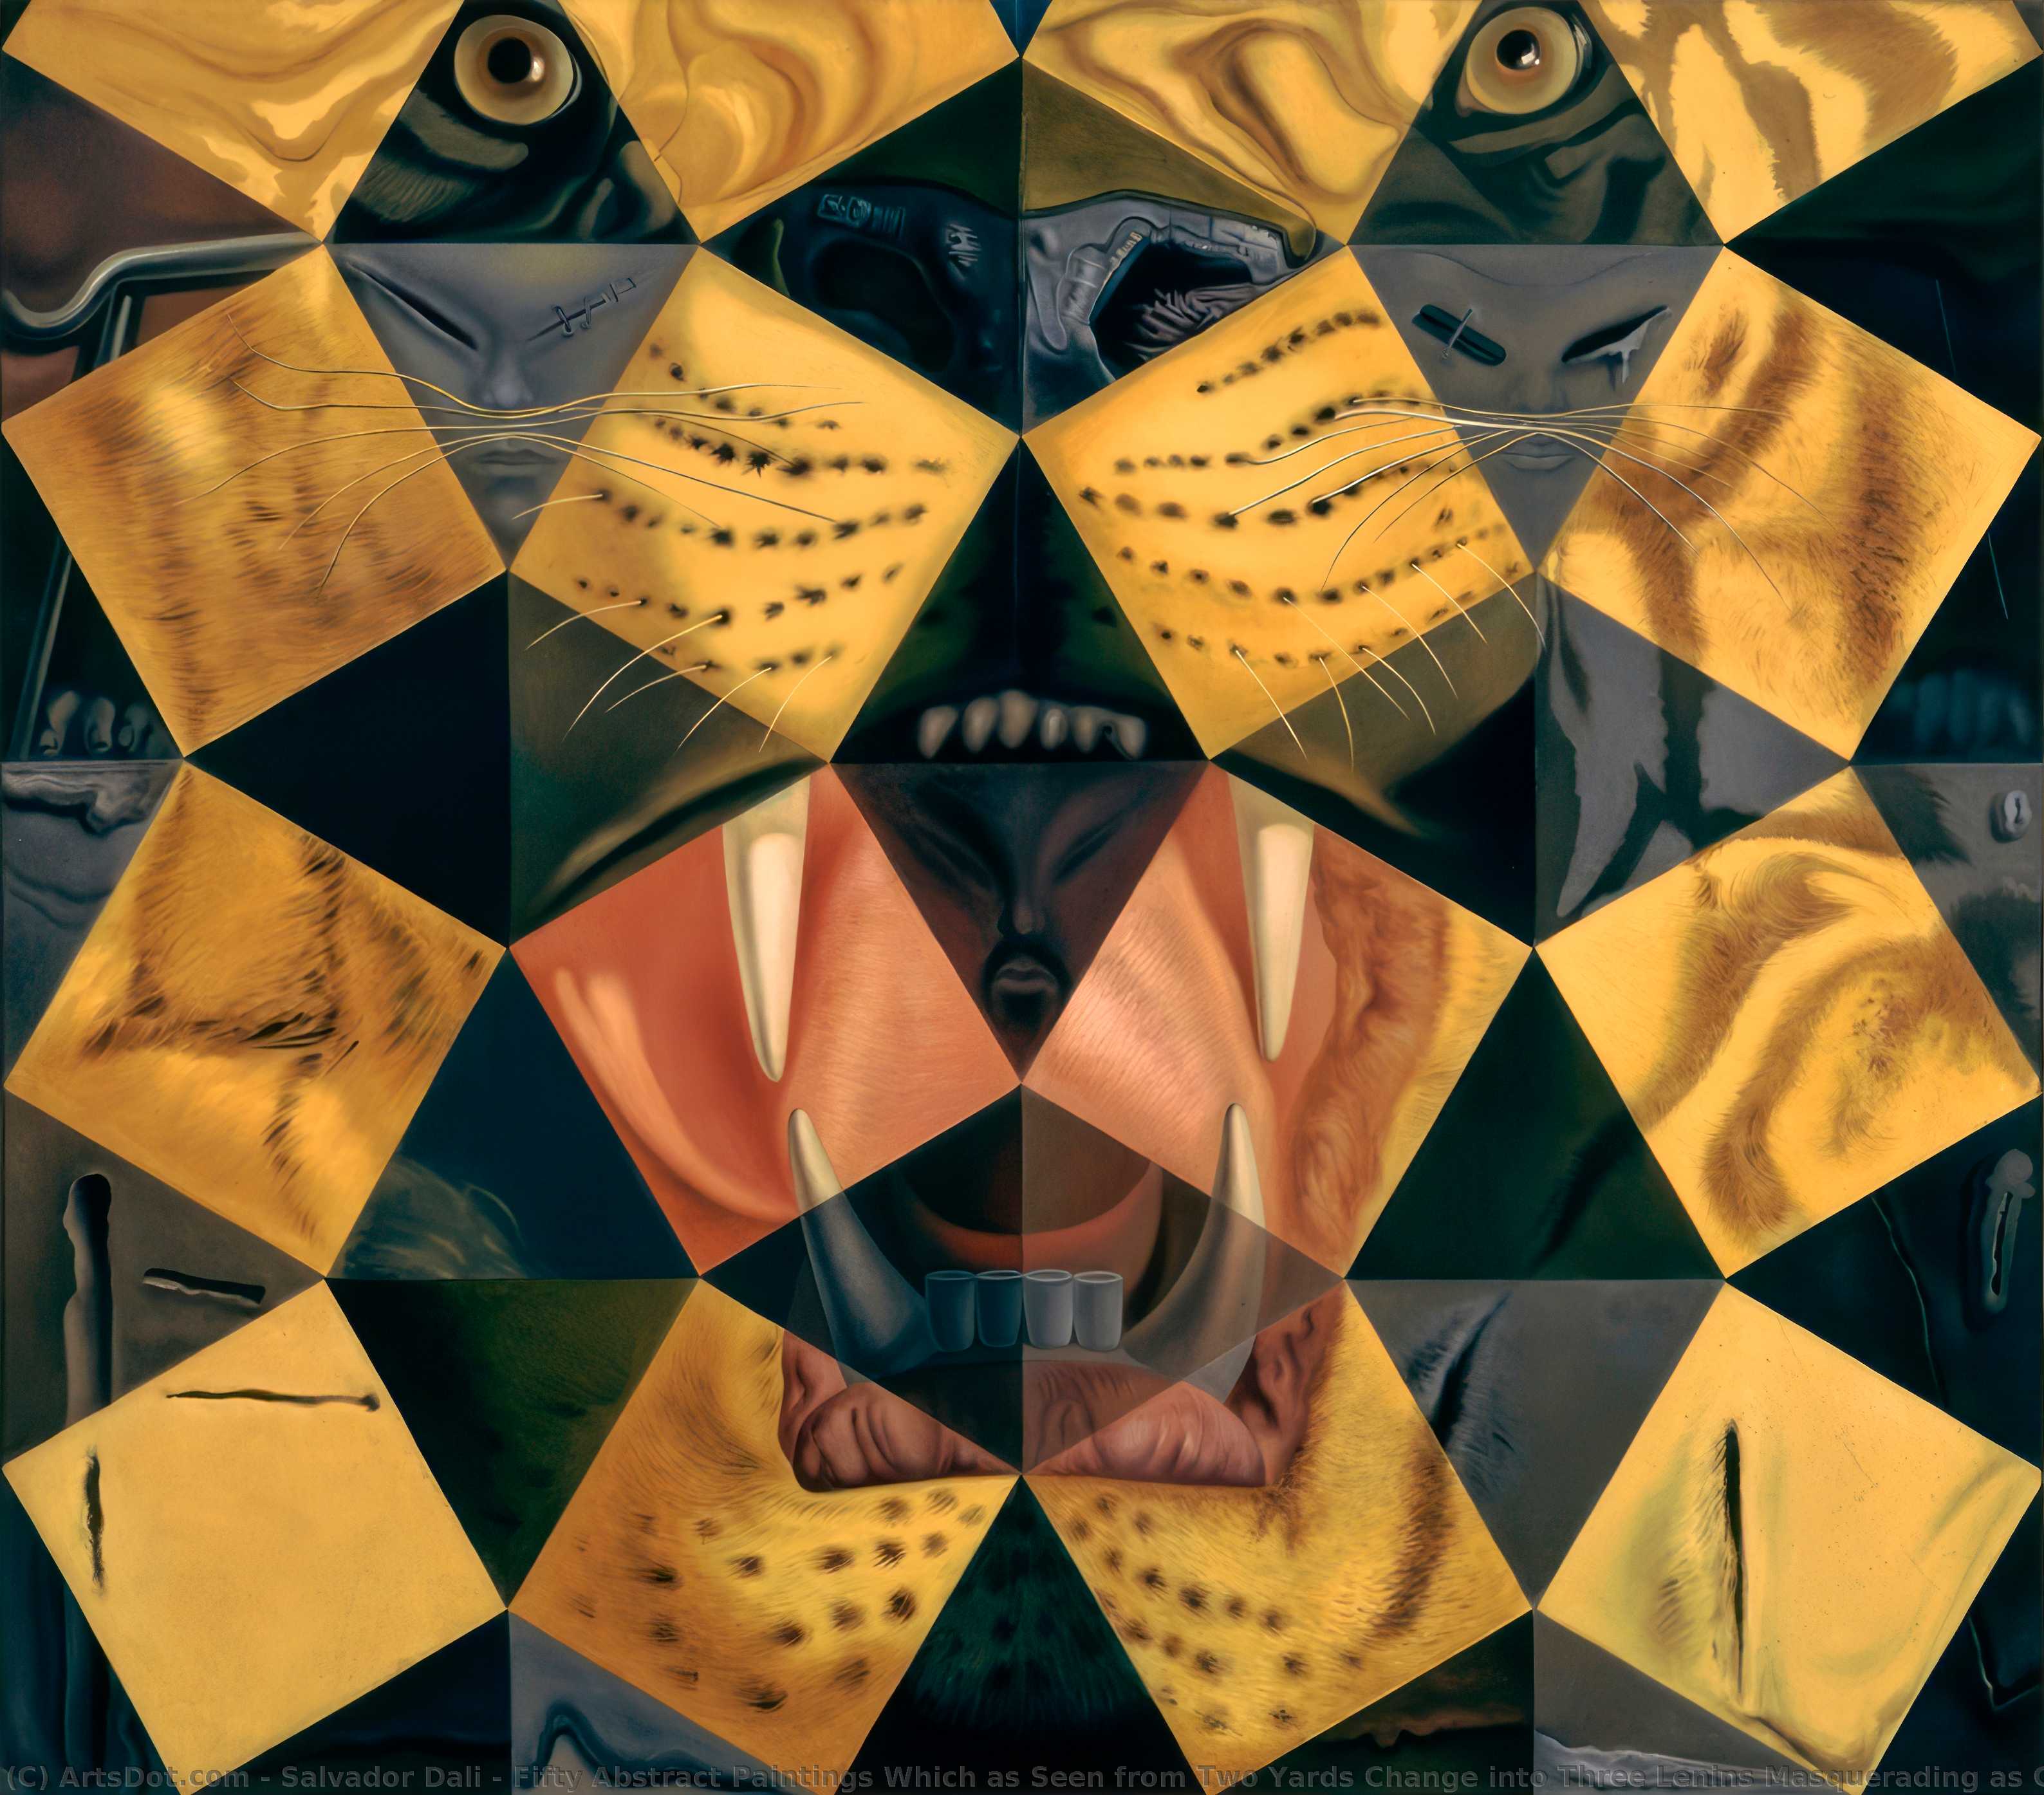 WikiOO.org - Enciklopedija dailės - Tapyba, meno kuriniai Salvador Dali - Fifty Abstract Paintings Which as Seen from Two Yards Change into Three Lenins Masquerading as Chinese and as Seen from Six Yards Appear as the Head of a Royal Bengal Tiger, 1963